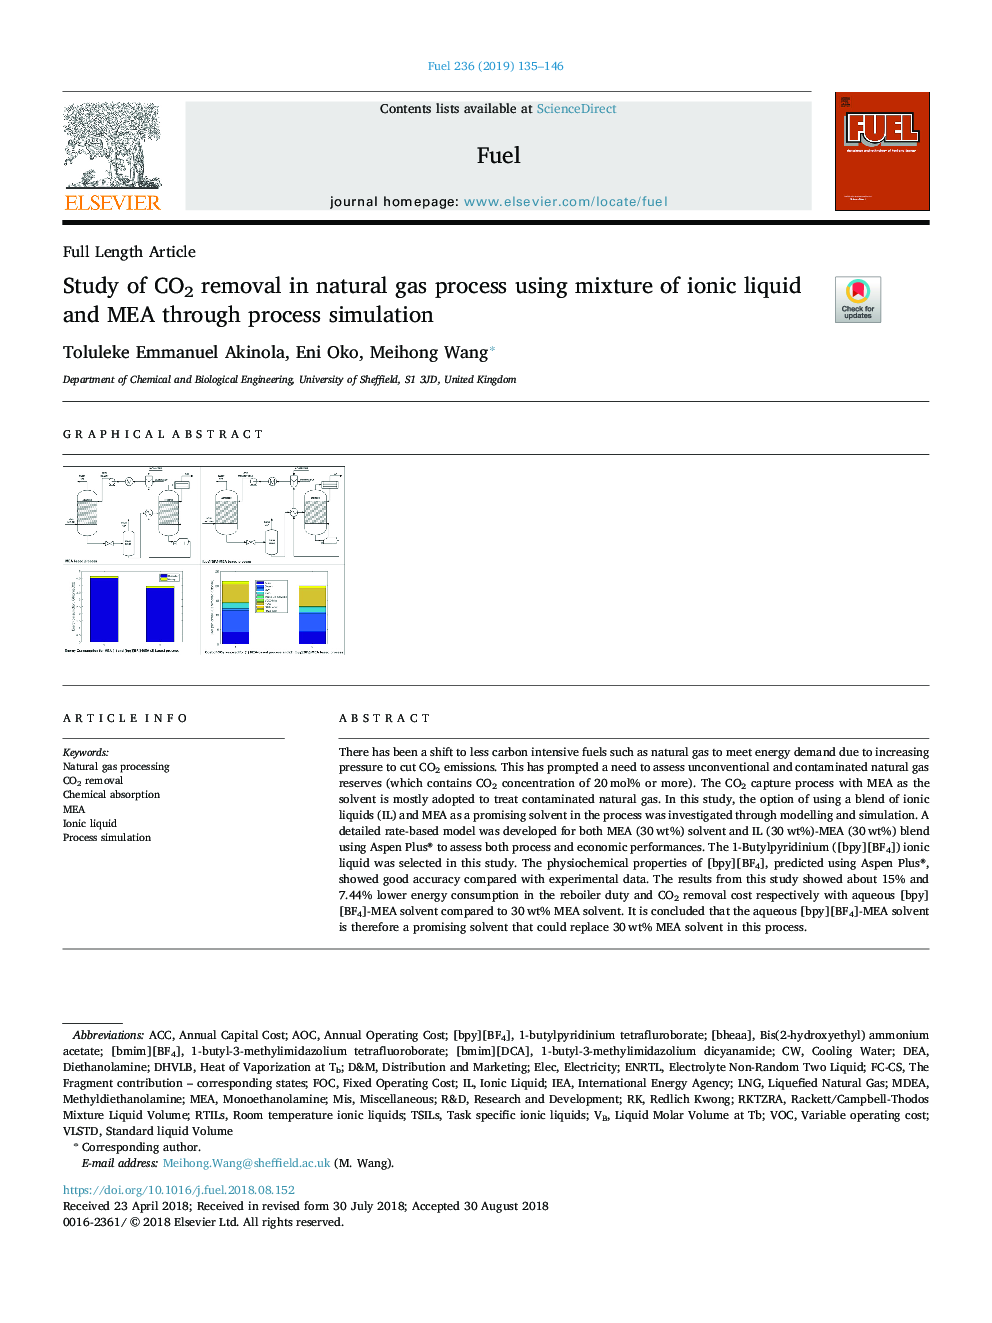 Study of CO2 removal in natural gas process using mixture of ionic liquid and MEA through process simulation